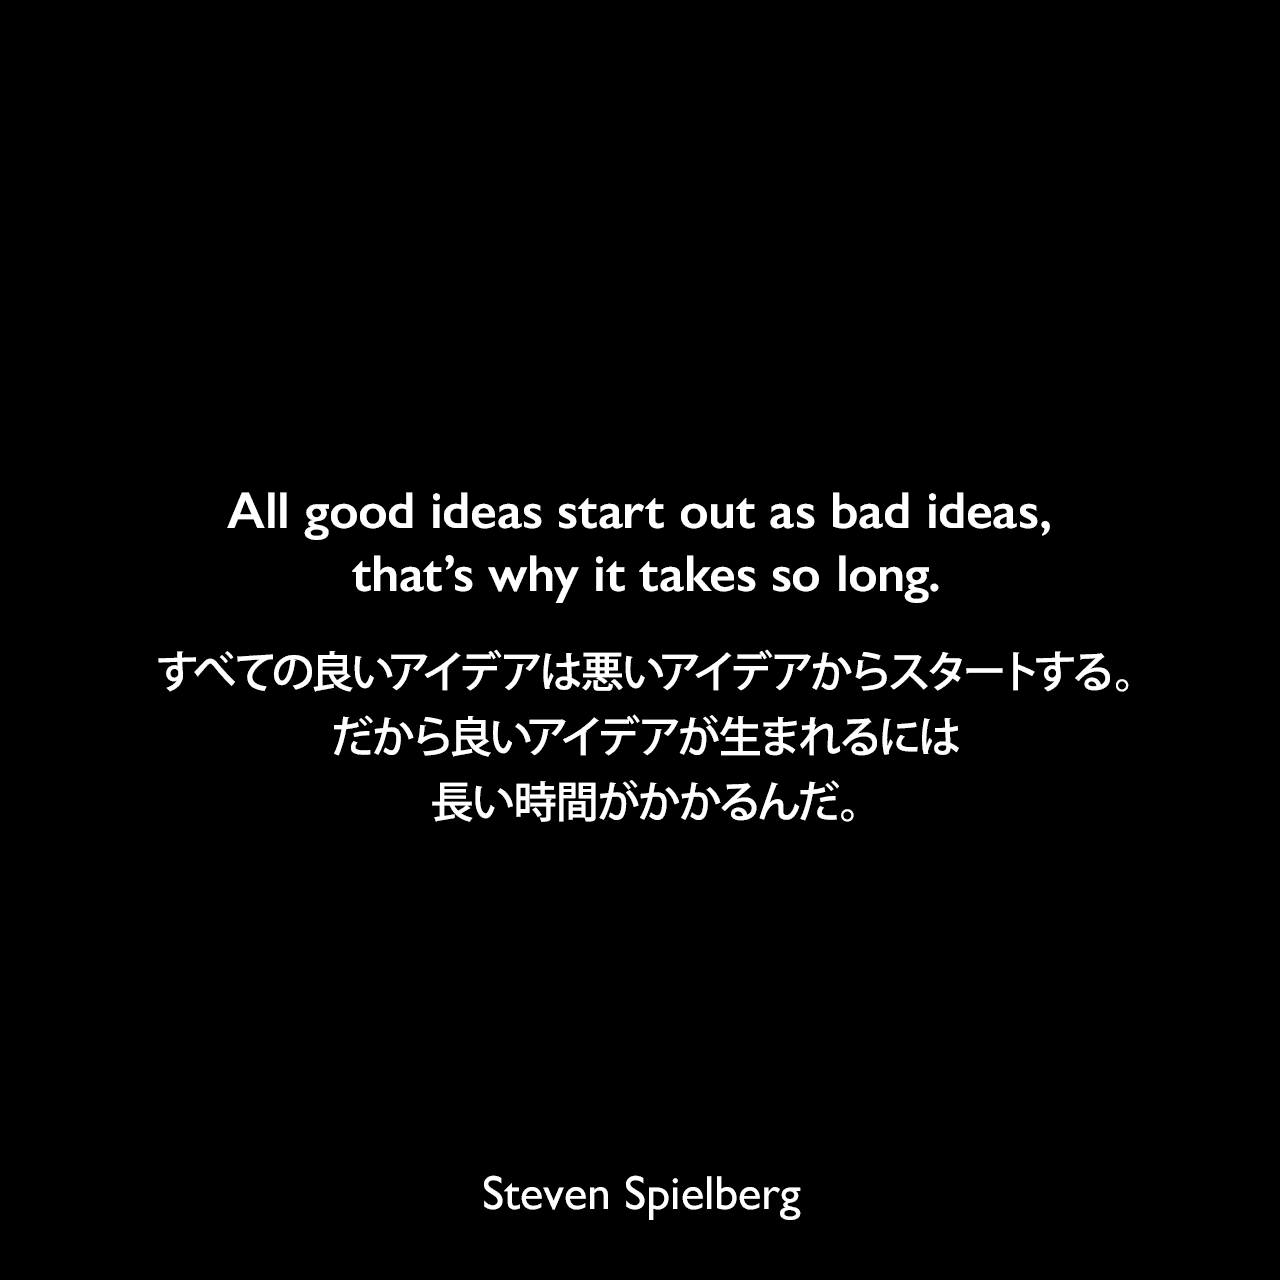 All good ideas start out as bad ideas, that’s why it takes so long.すべての良いアイデアは悪いアイデアからスタートする。だから良いアイデアが生まれるには長い時間がかかるんだ。Steven Spielberg